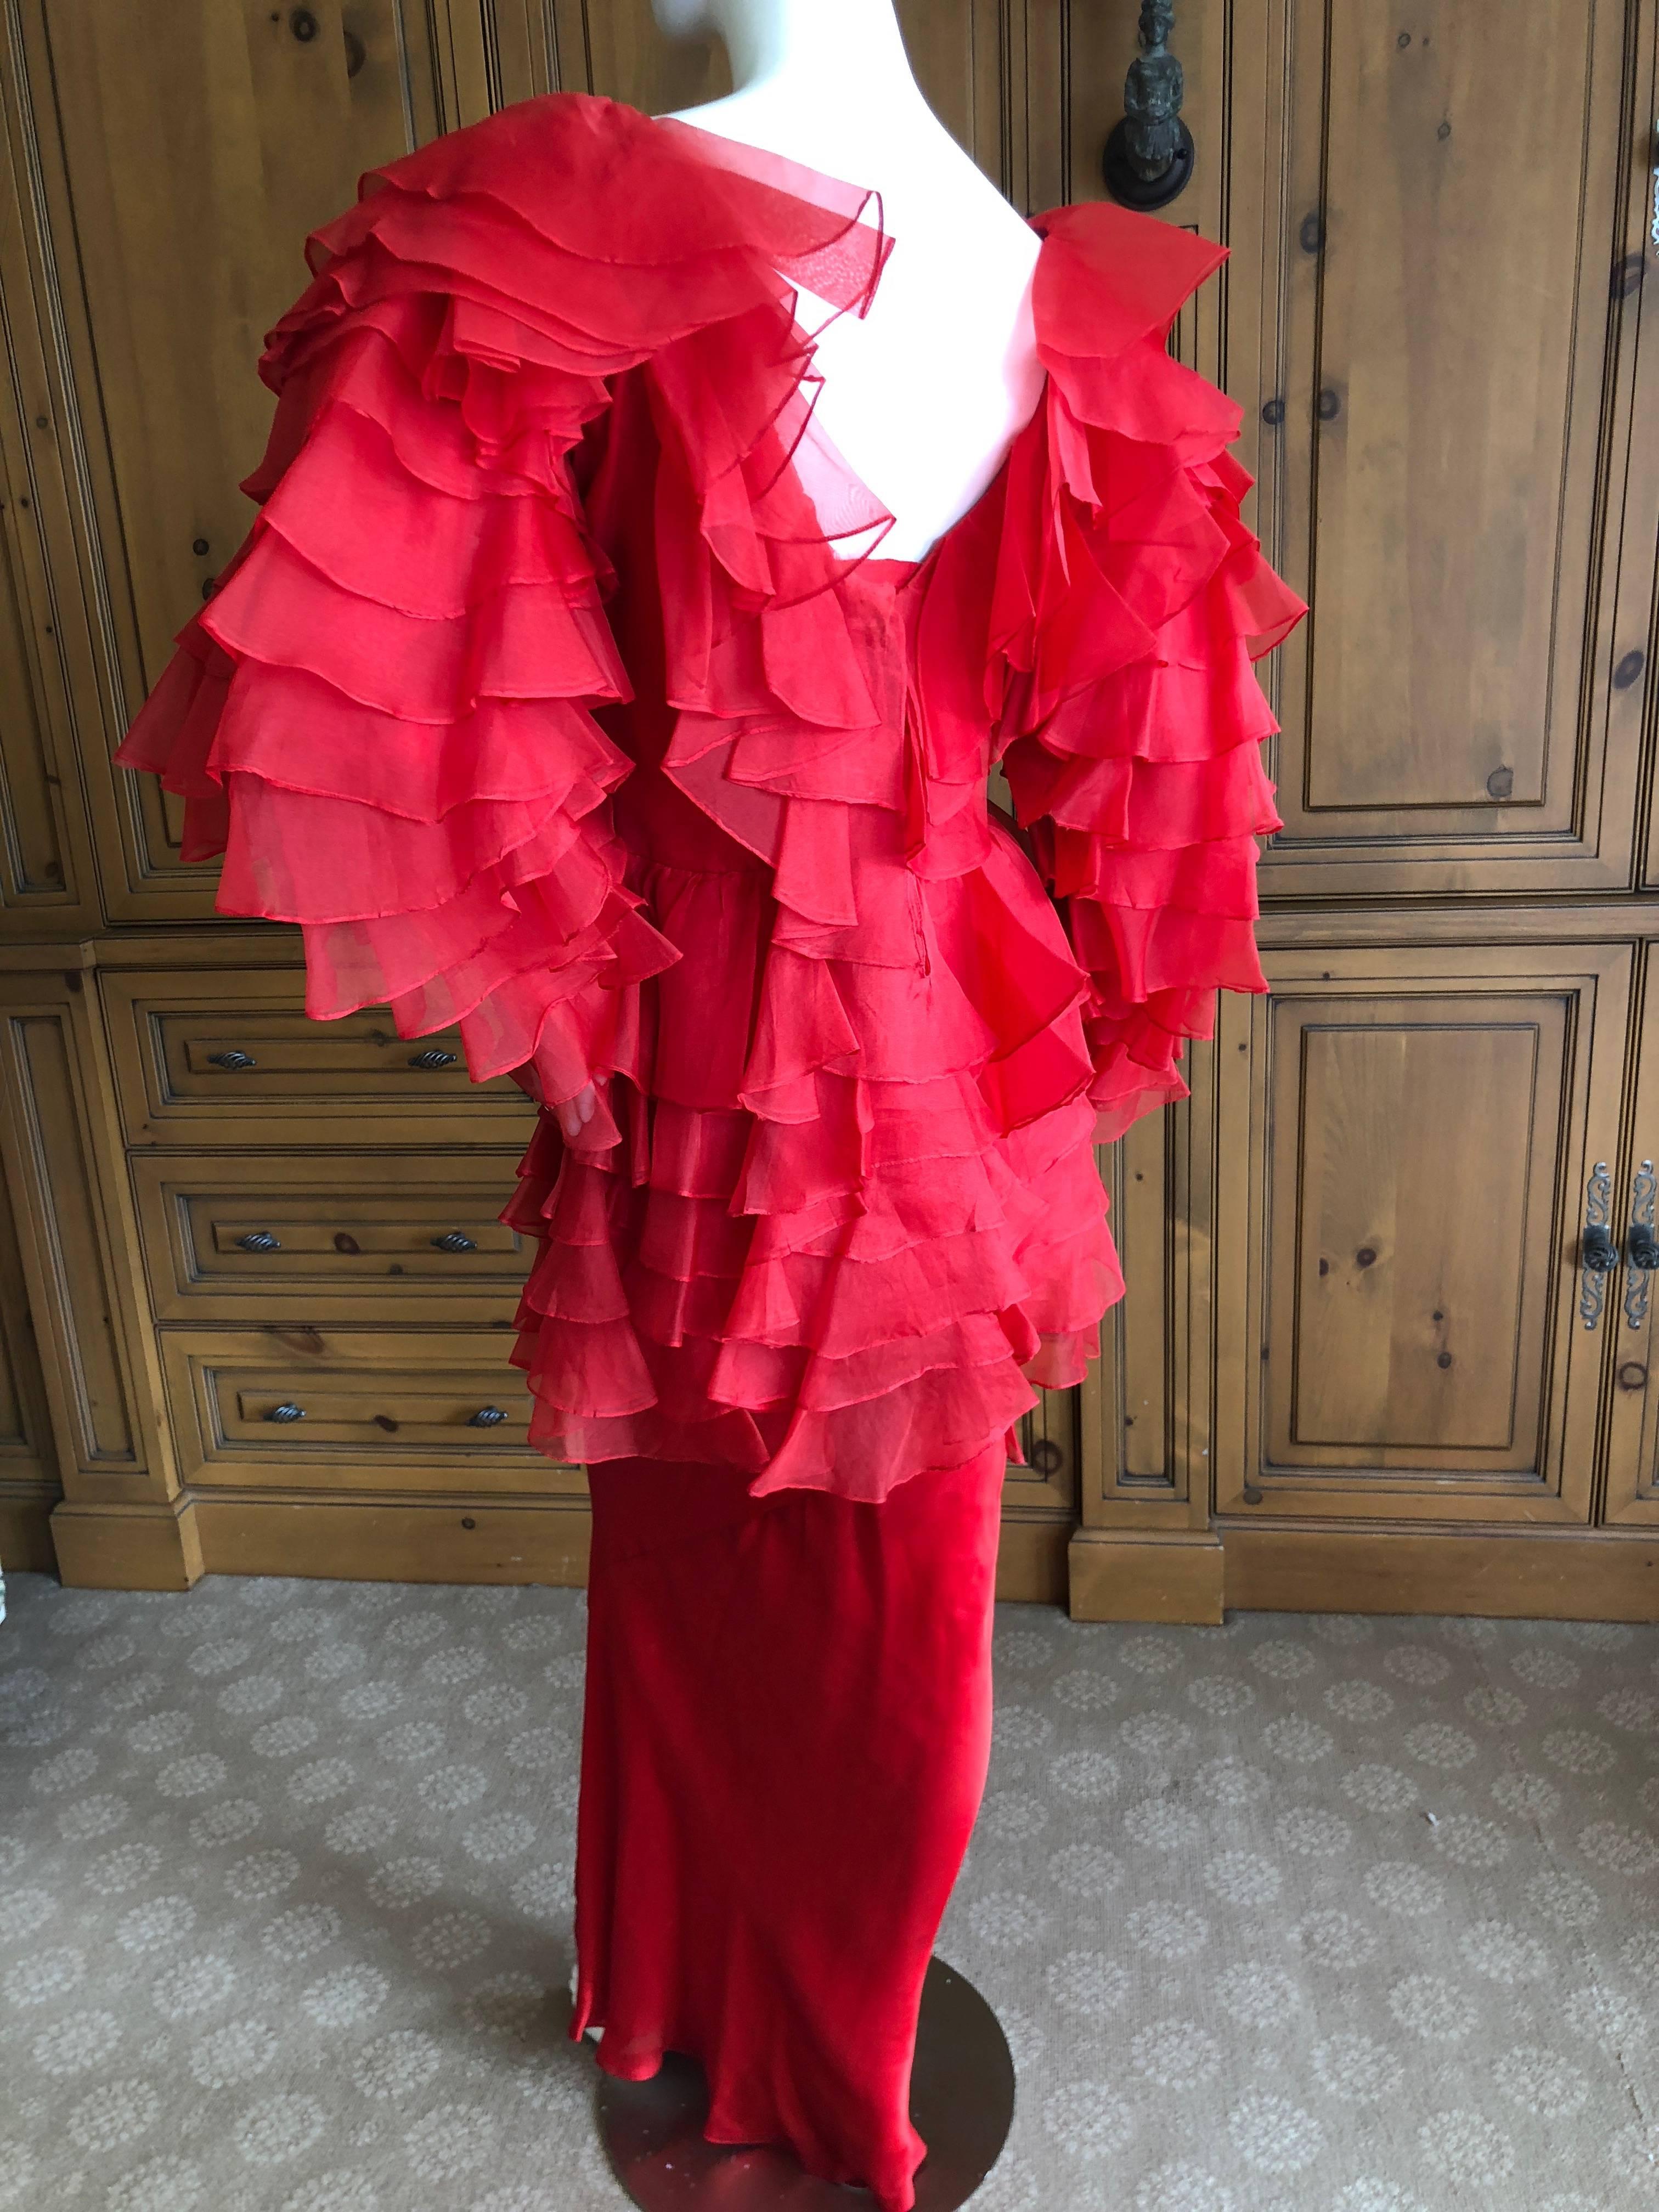 Cardinali 1970s Scarlet Red Ruffled Top and Bias Cut Silk Skirt with Fascinator For Sale 3